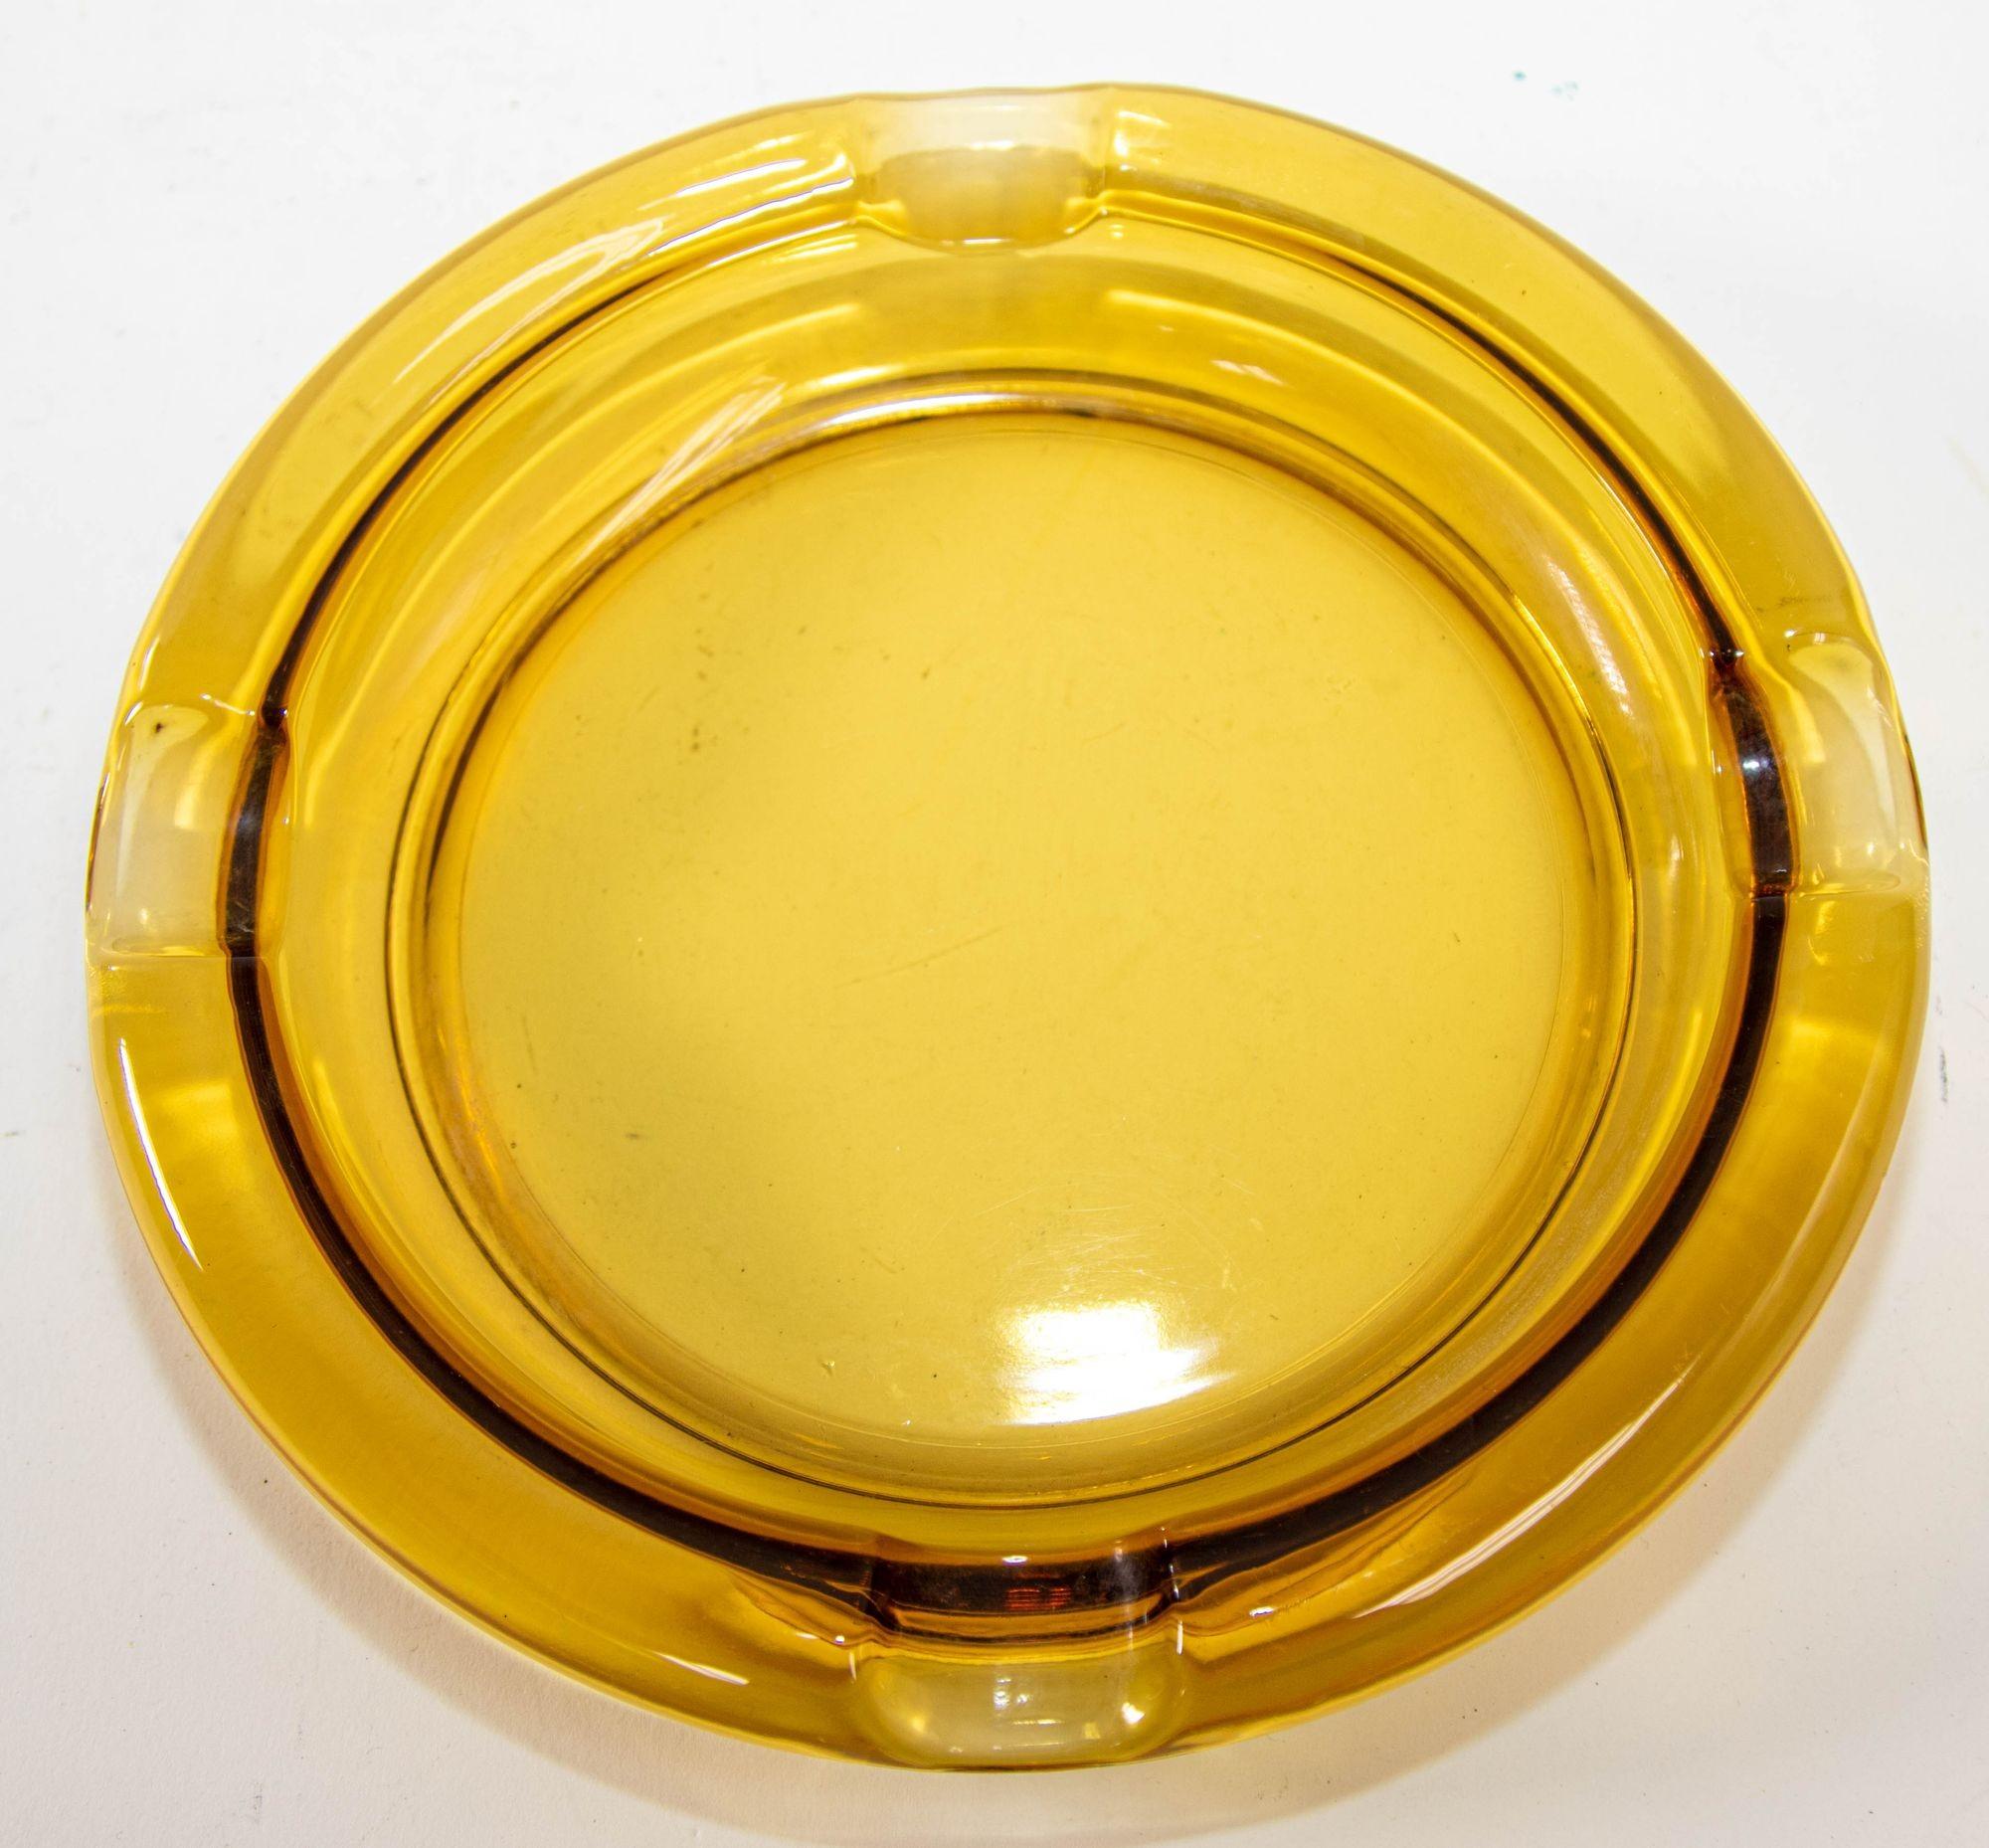 Large Moroccan amber glass ashtrays from the 1960s 1970s.
Vintage Hazel Atlas amber round circular form cigar ashtray.
Vintage hazel atlas Moroccan amber yellow glass ashtray, the color vary with light from yellow amber to dark honey amber.
In